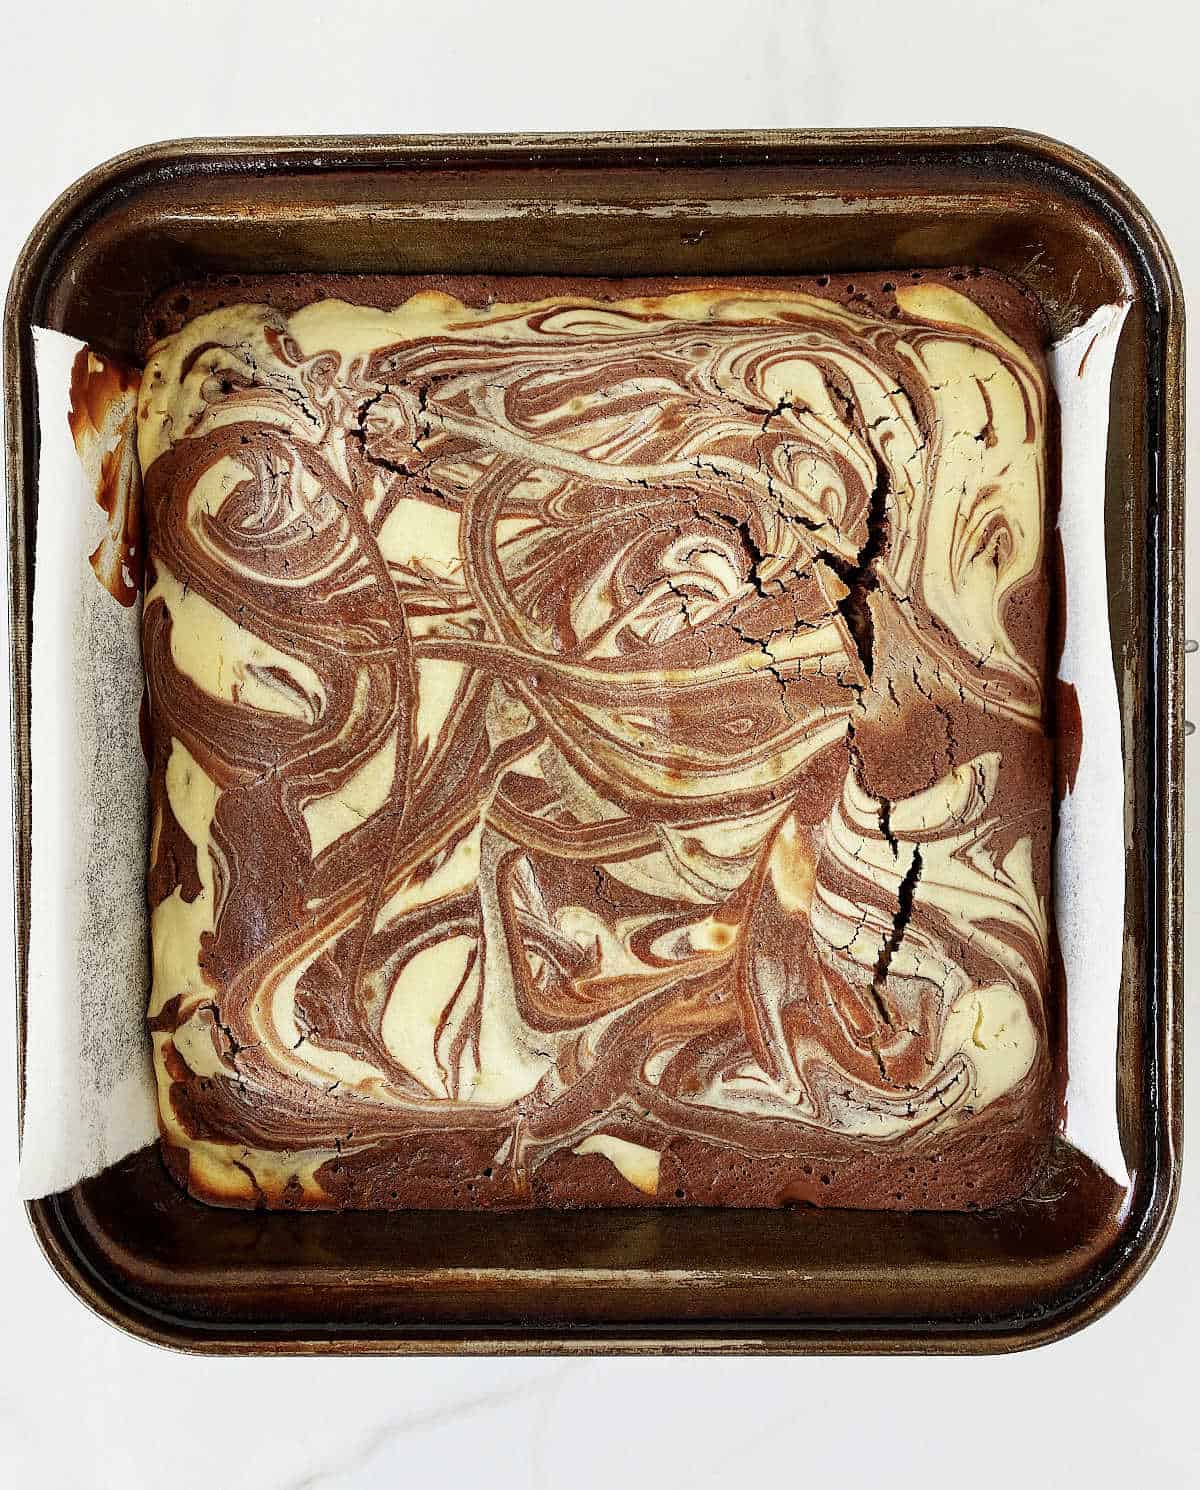 Baked cheesecake brownies in a metal square pan on white marble.